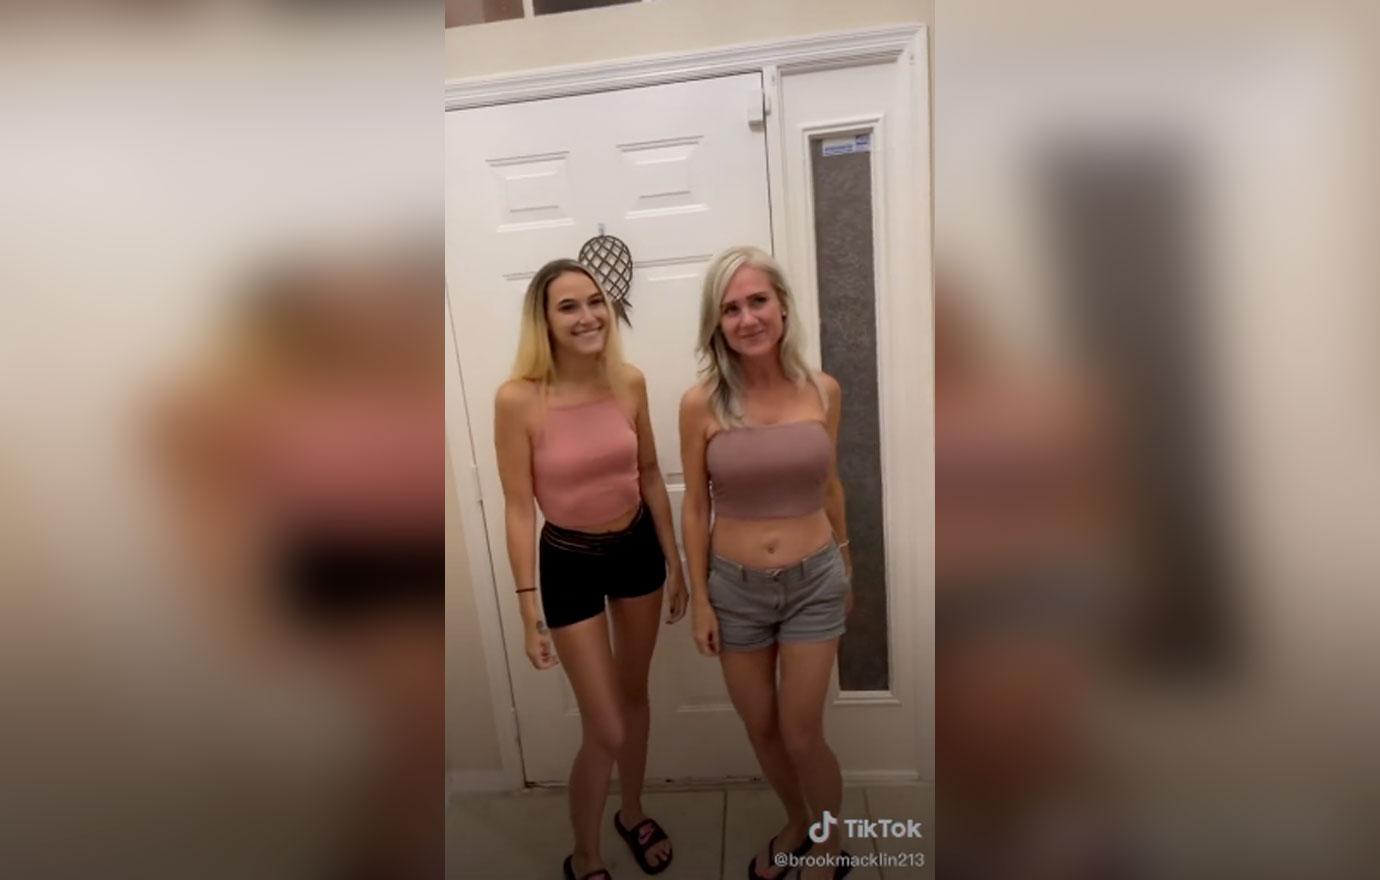 Viral TikTok Swinger Who Shares Her Husband With Her Mom and Sister Blowdries Her Private Parts To Provide Hot Meal photo photo